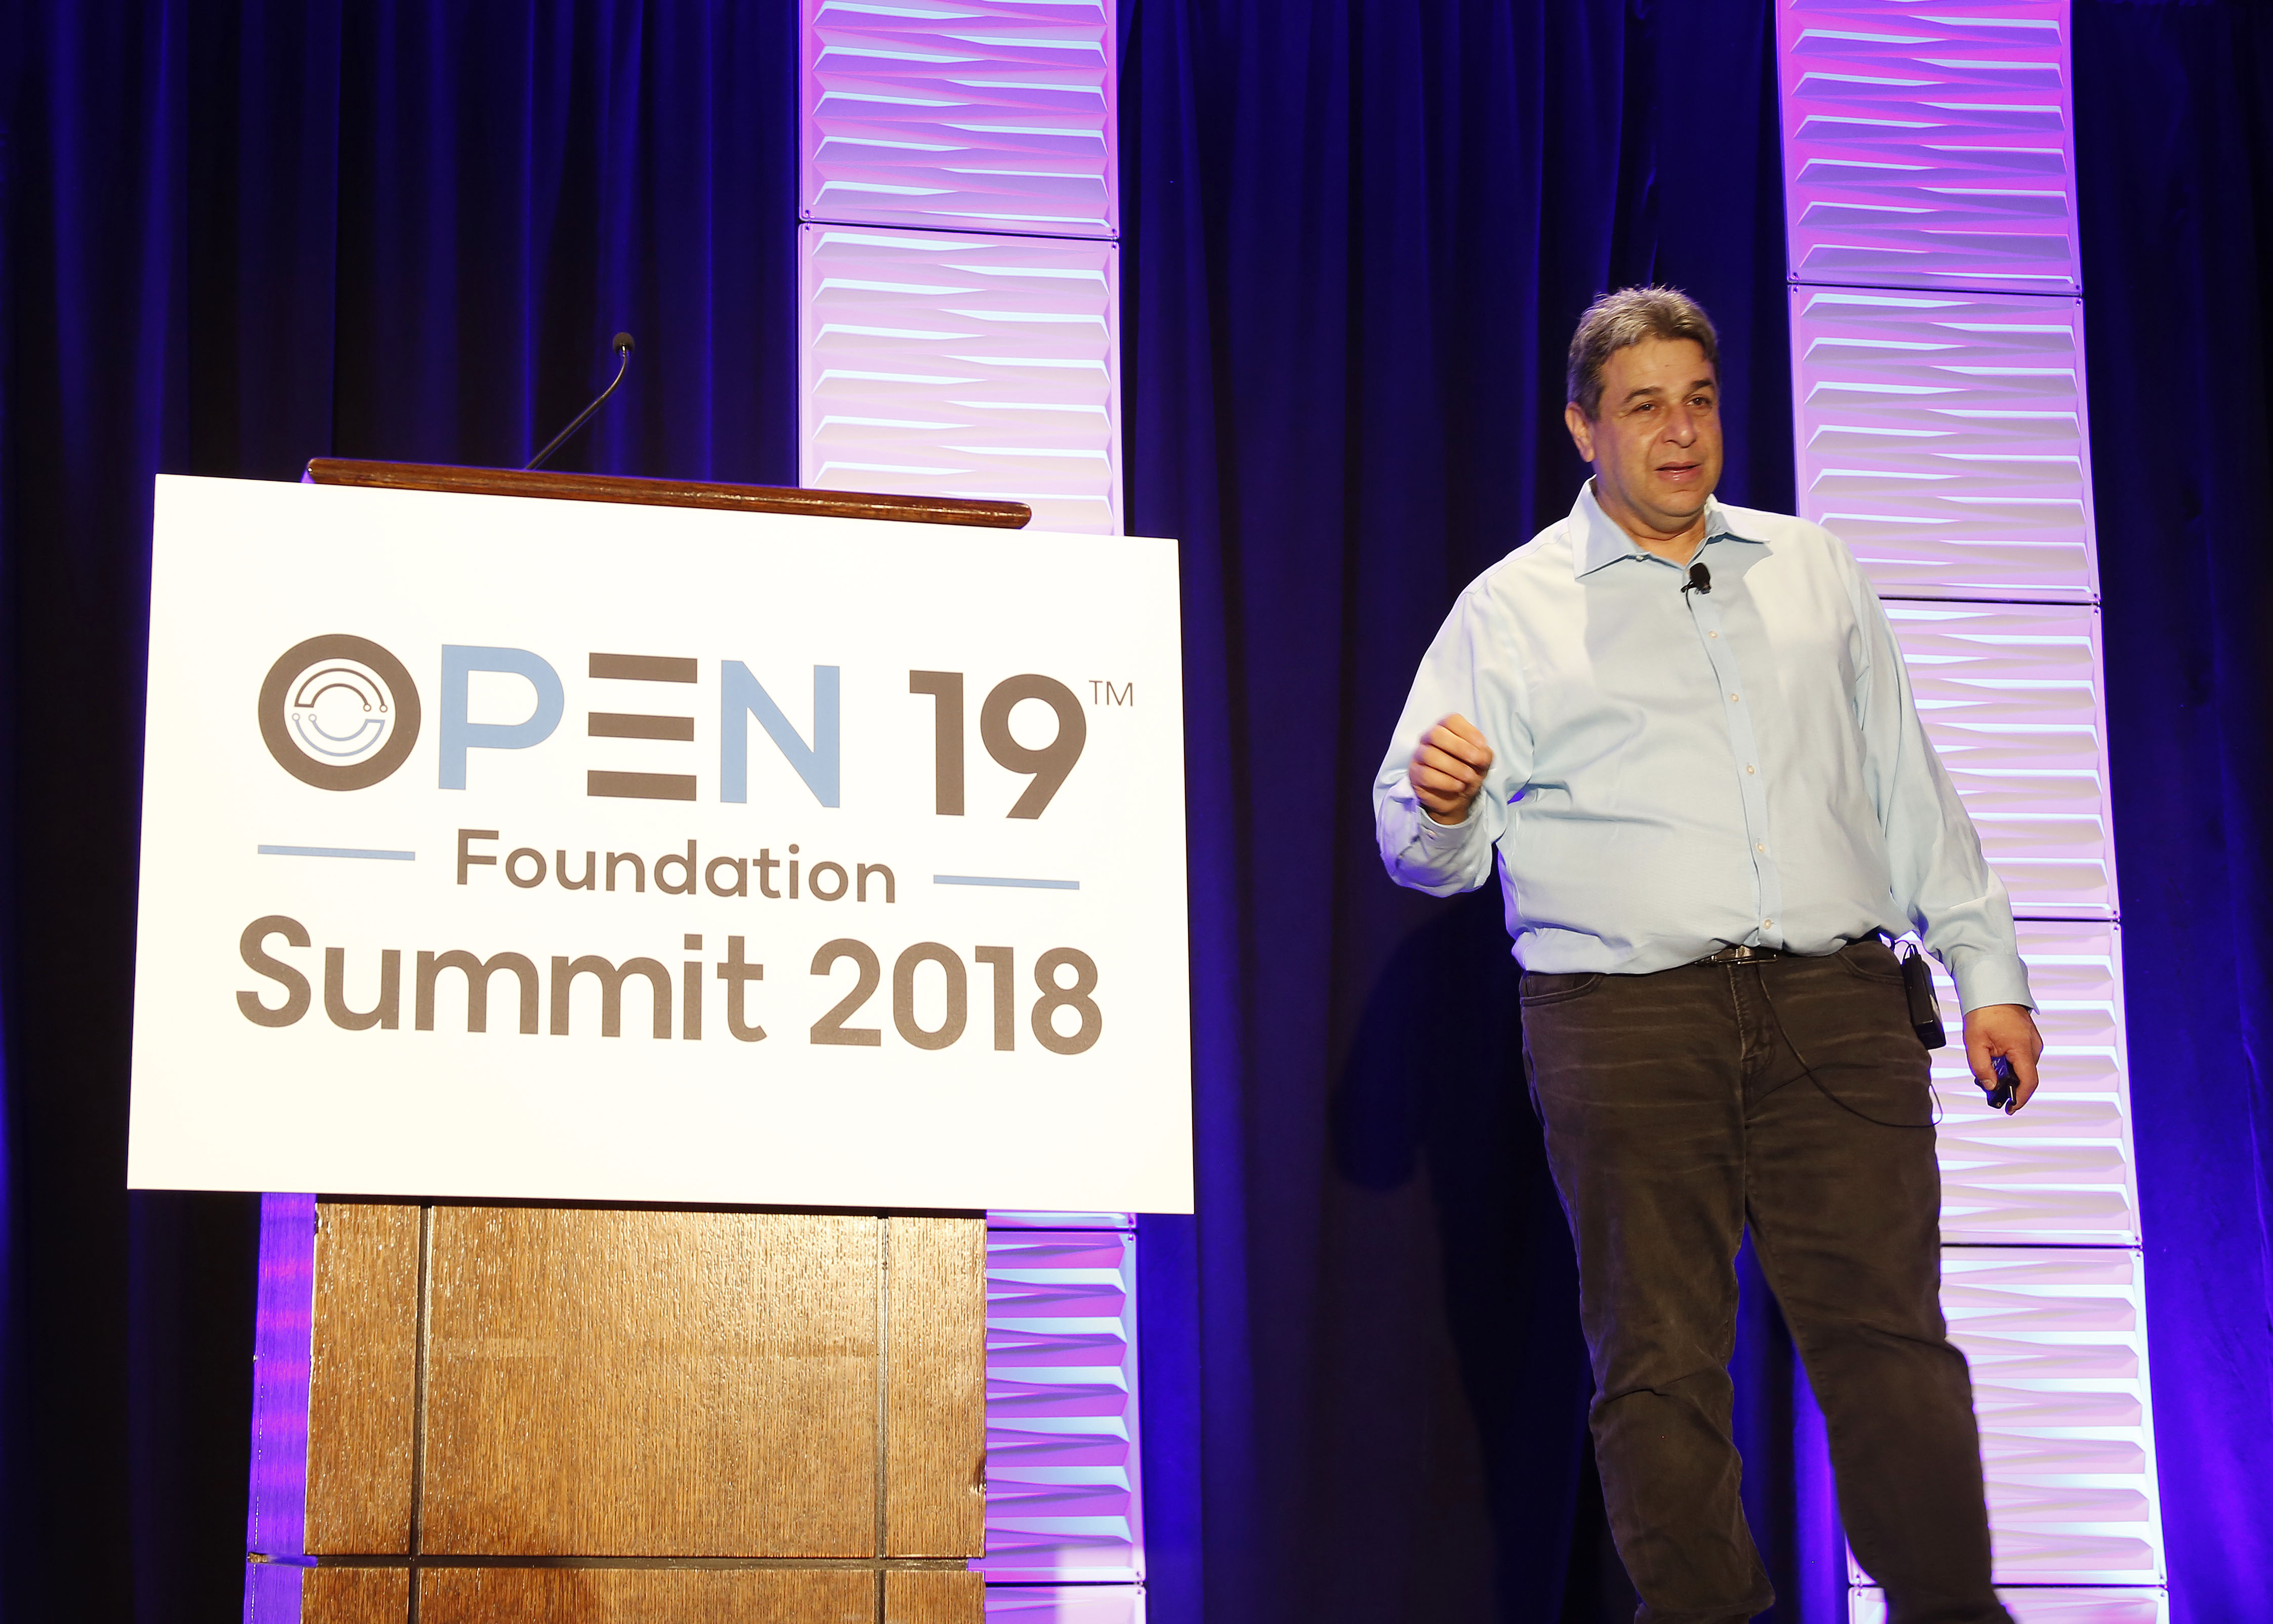 Yuval Bachar, former principal engineer, data center architecture, LinkedIn, and president and chairman of the Open19 Foundation, speaking at the foundation's 2018 summit.